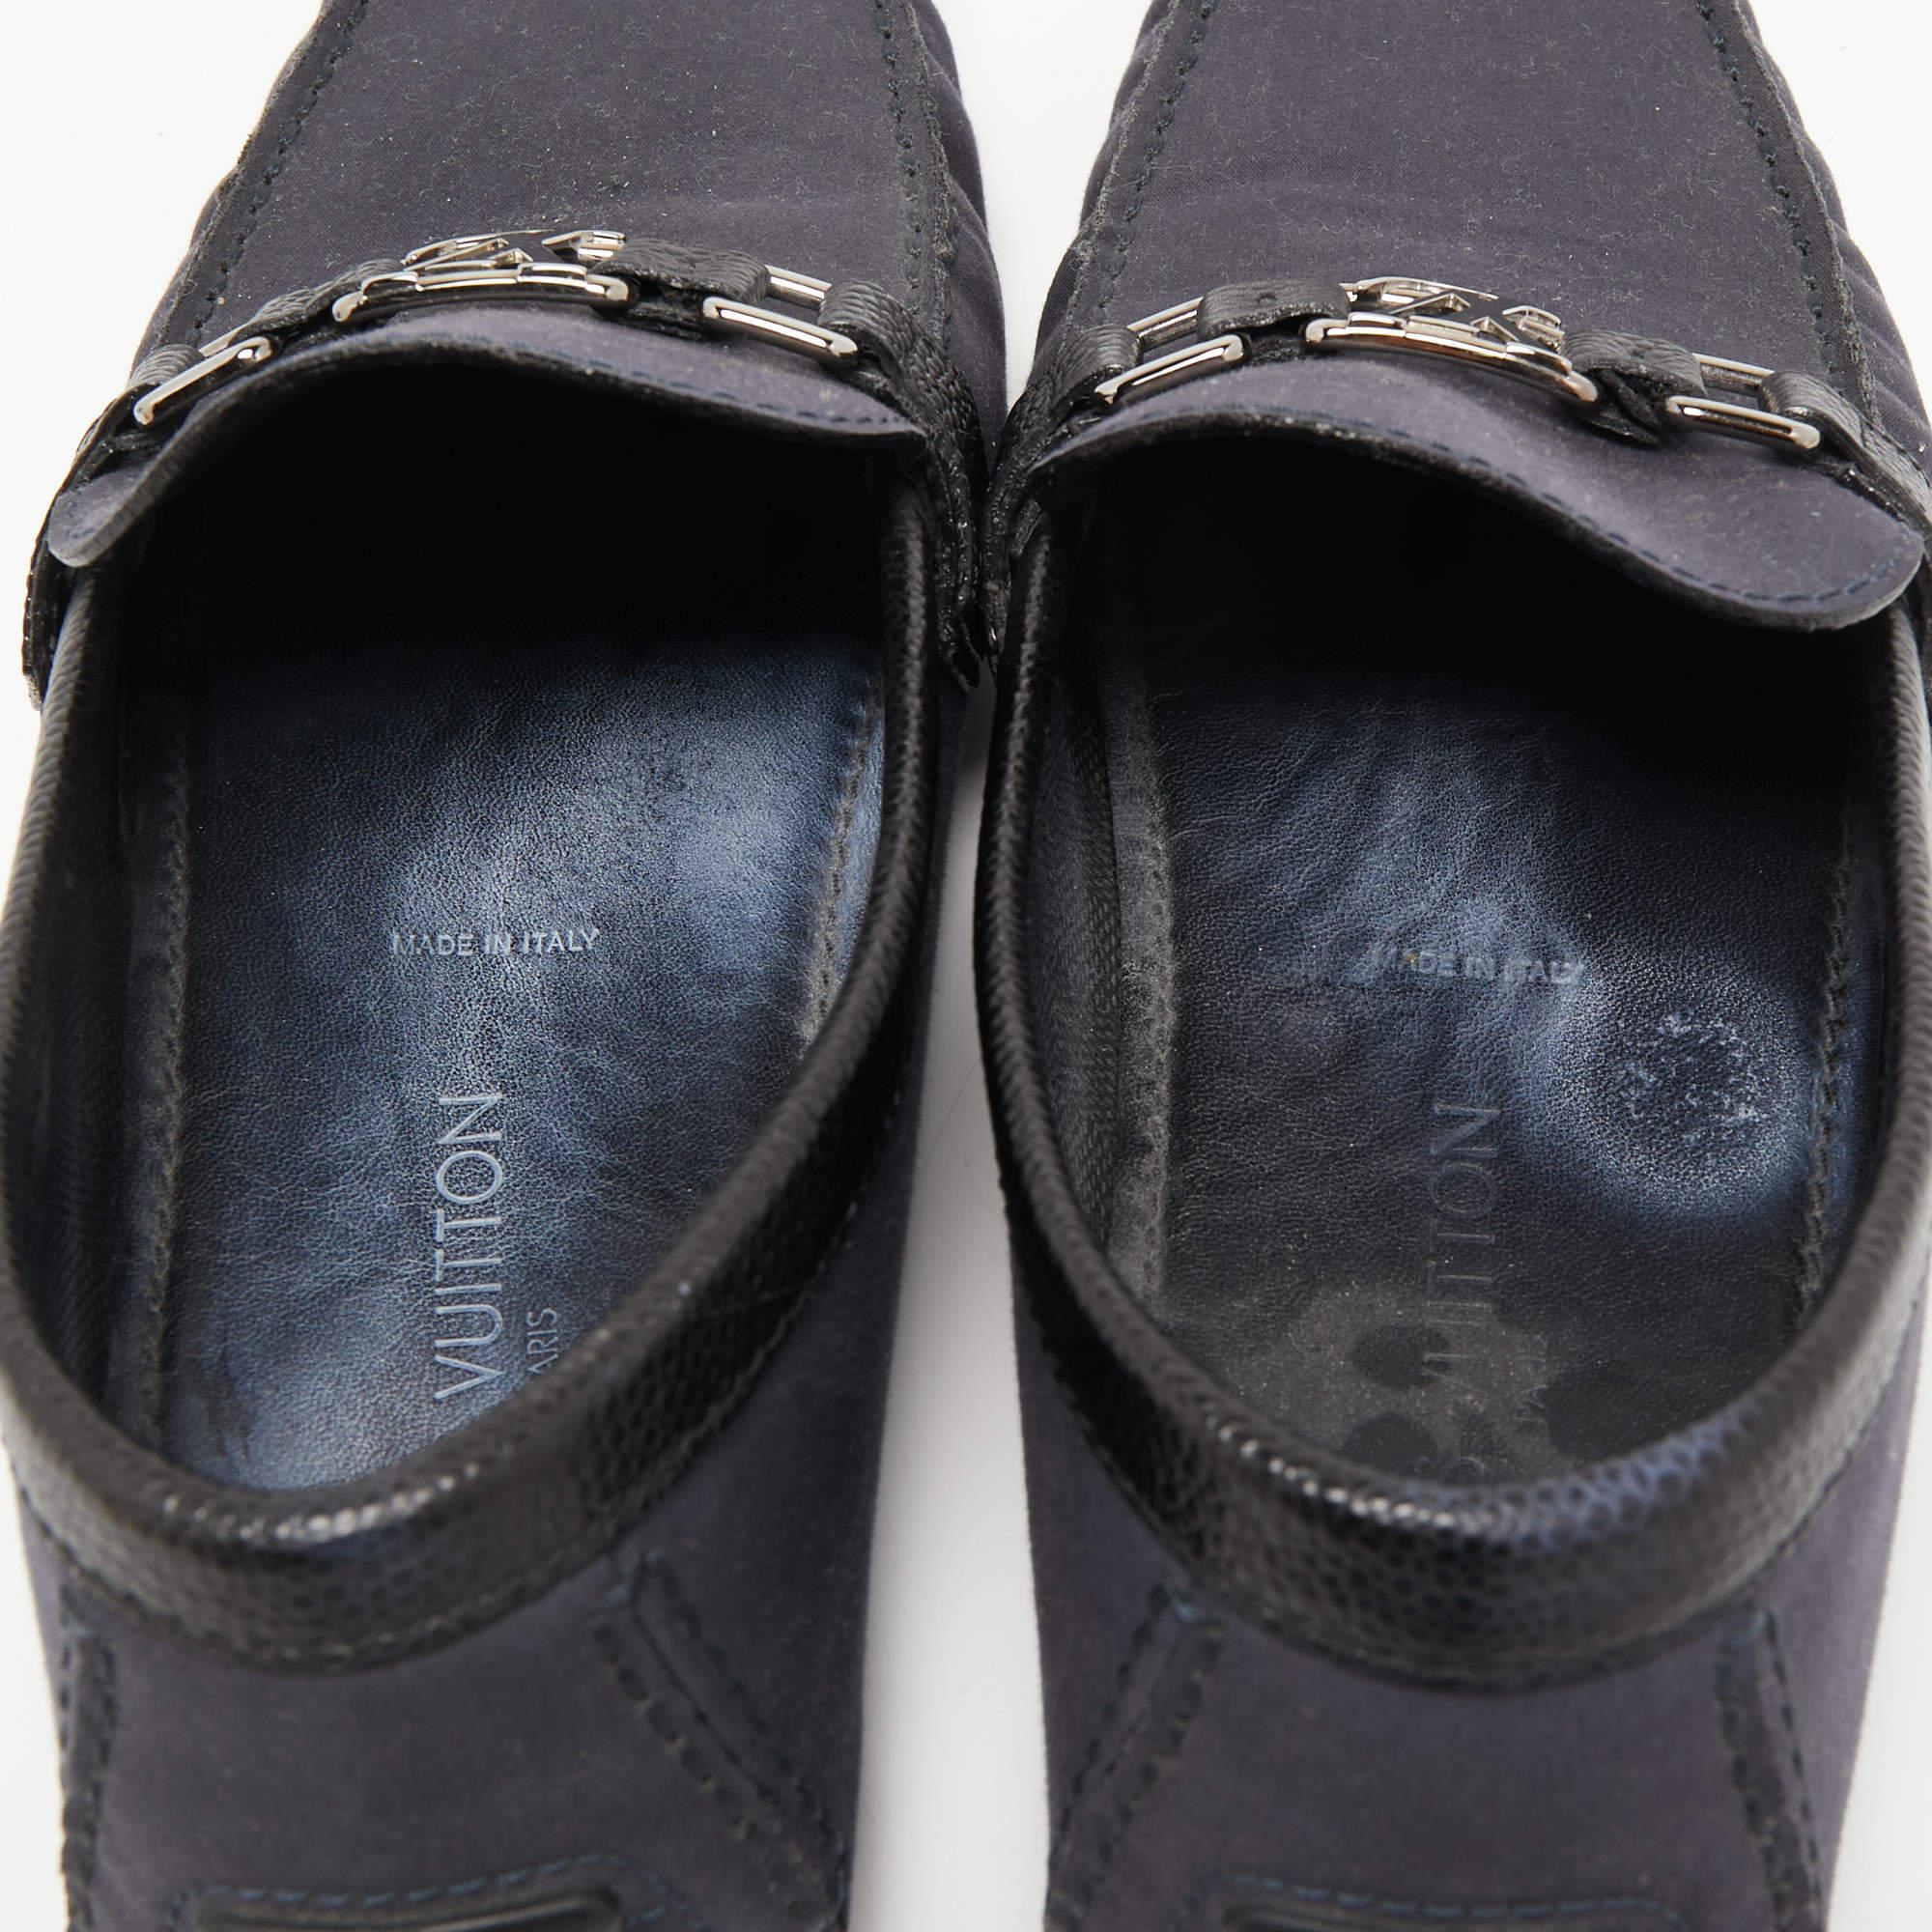 Louis Vuitton Navy Blue Canvas and Leather Hockenheim Loafers Size 44 1